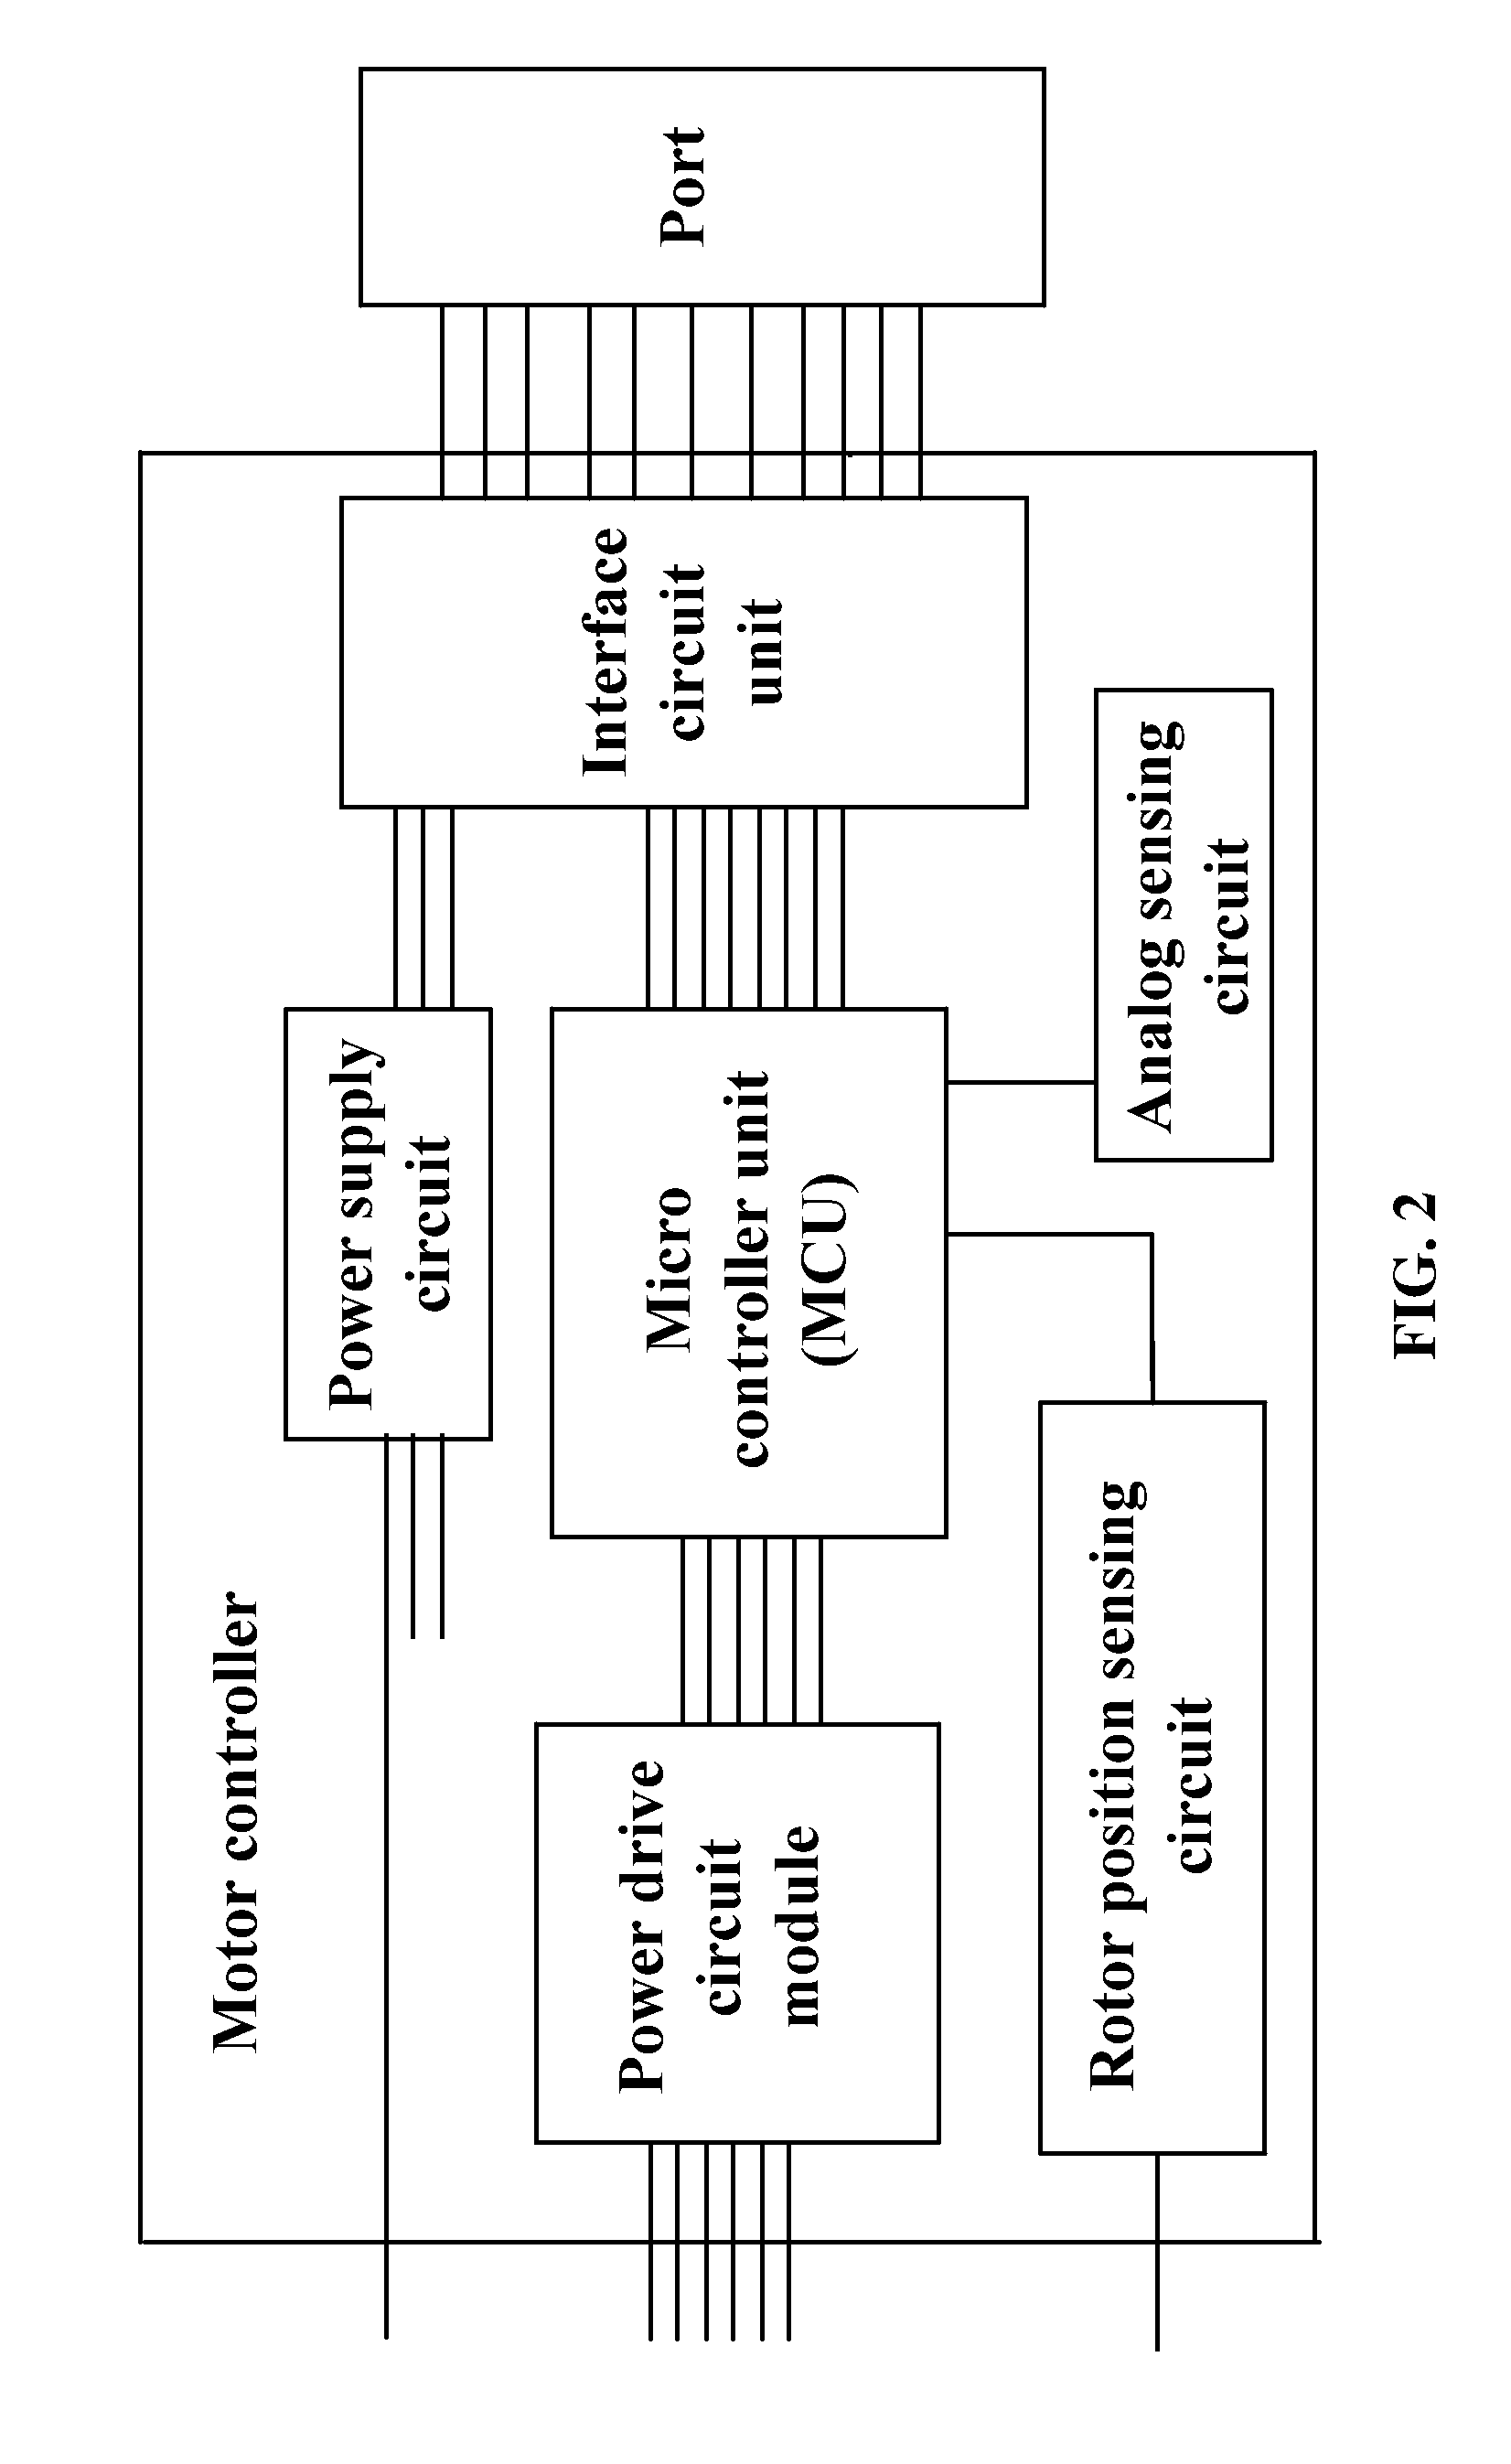 Daughter circuit board of an electronically commutated motor for communicating a motor controller with a control system of a user terminal